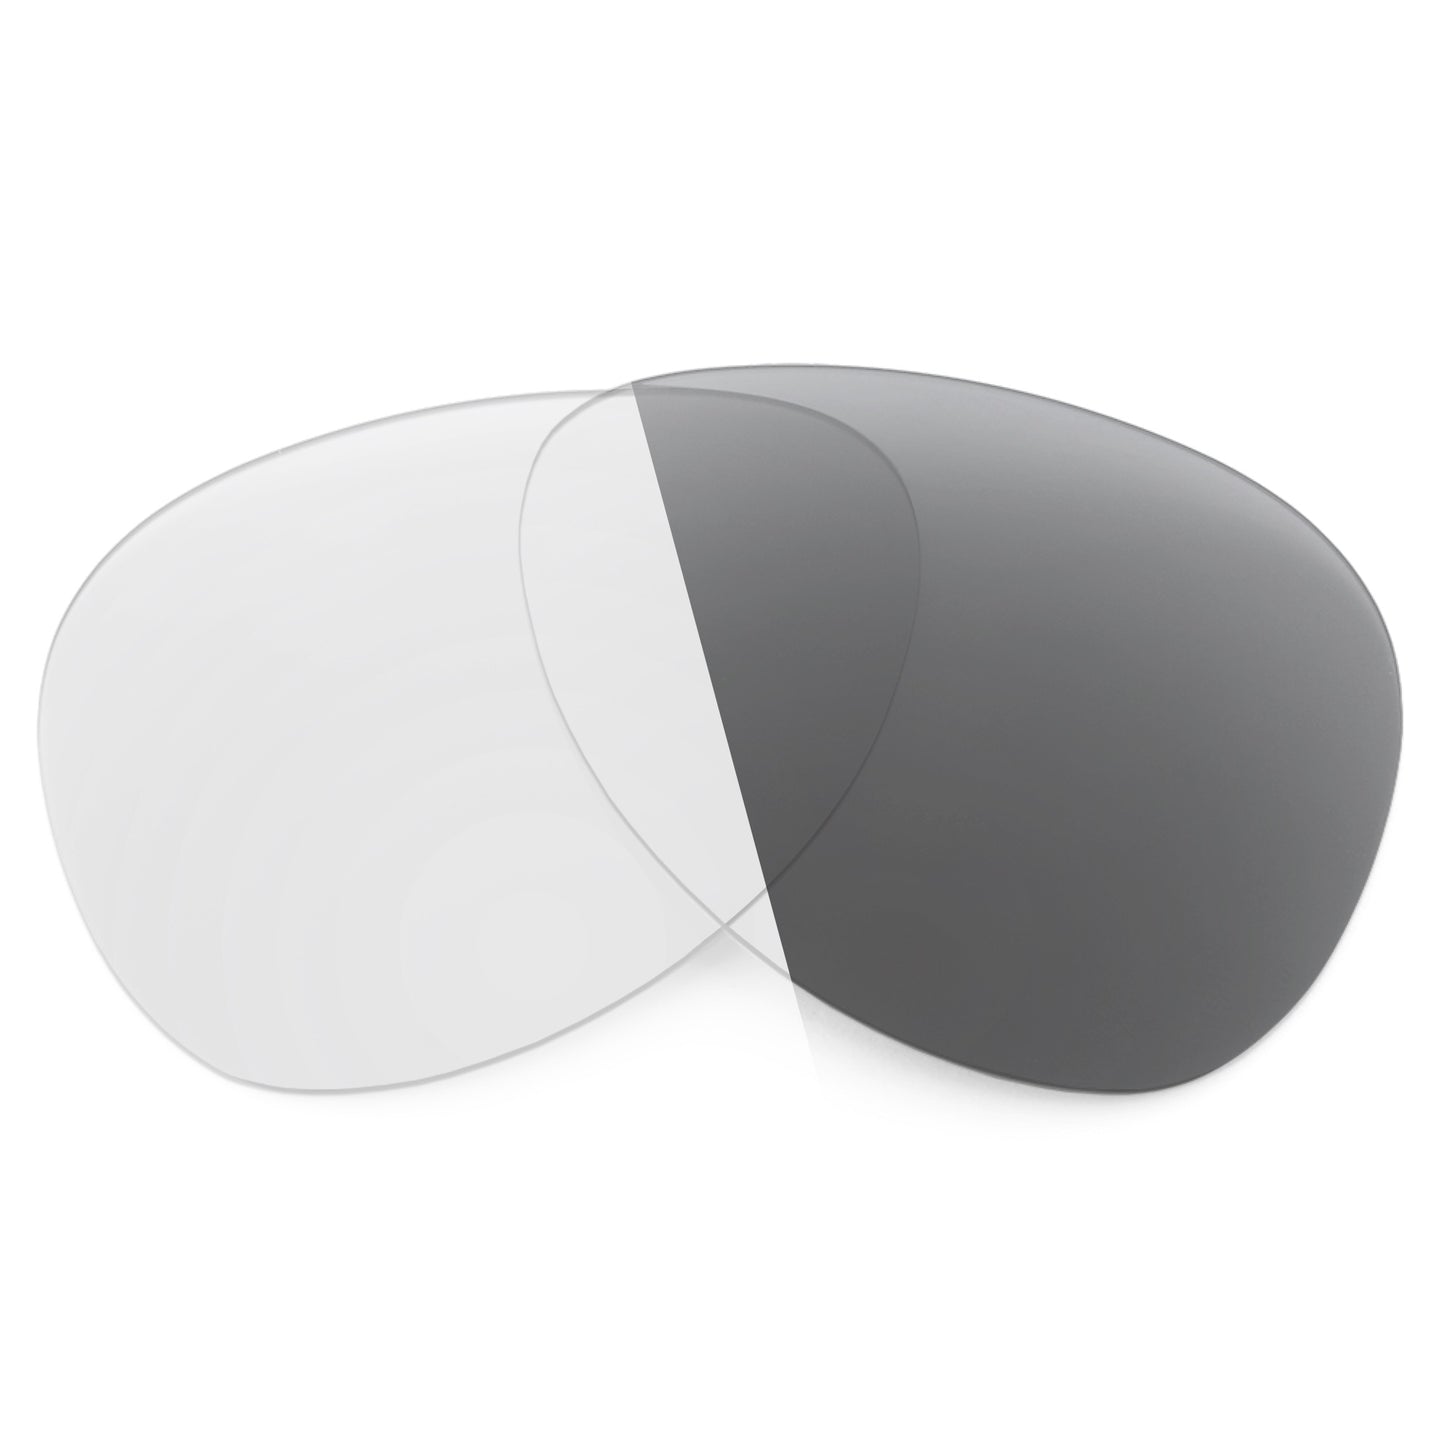 Revant replacement lenses for Ray-Ban RB8301 59mm Non-Polarized Adapt Gray Photochromic